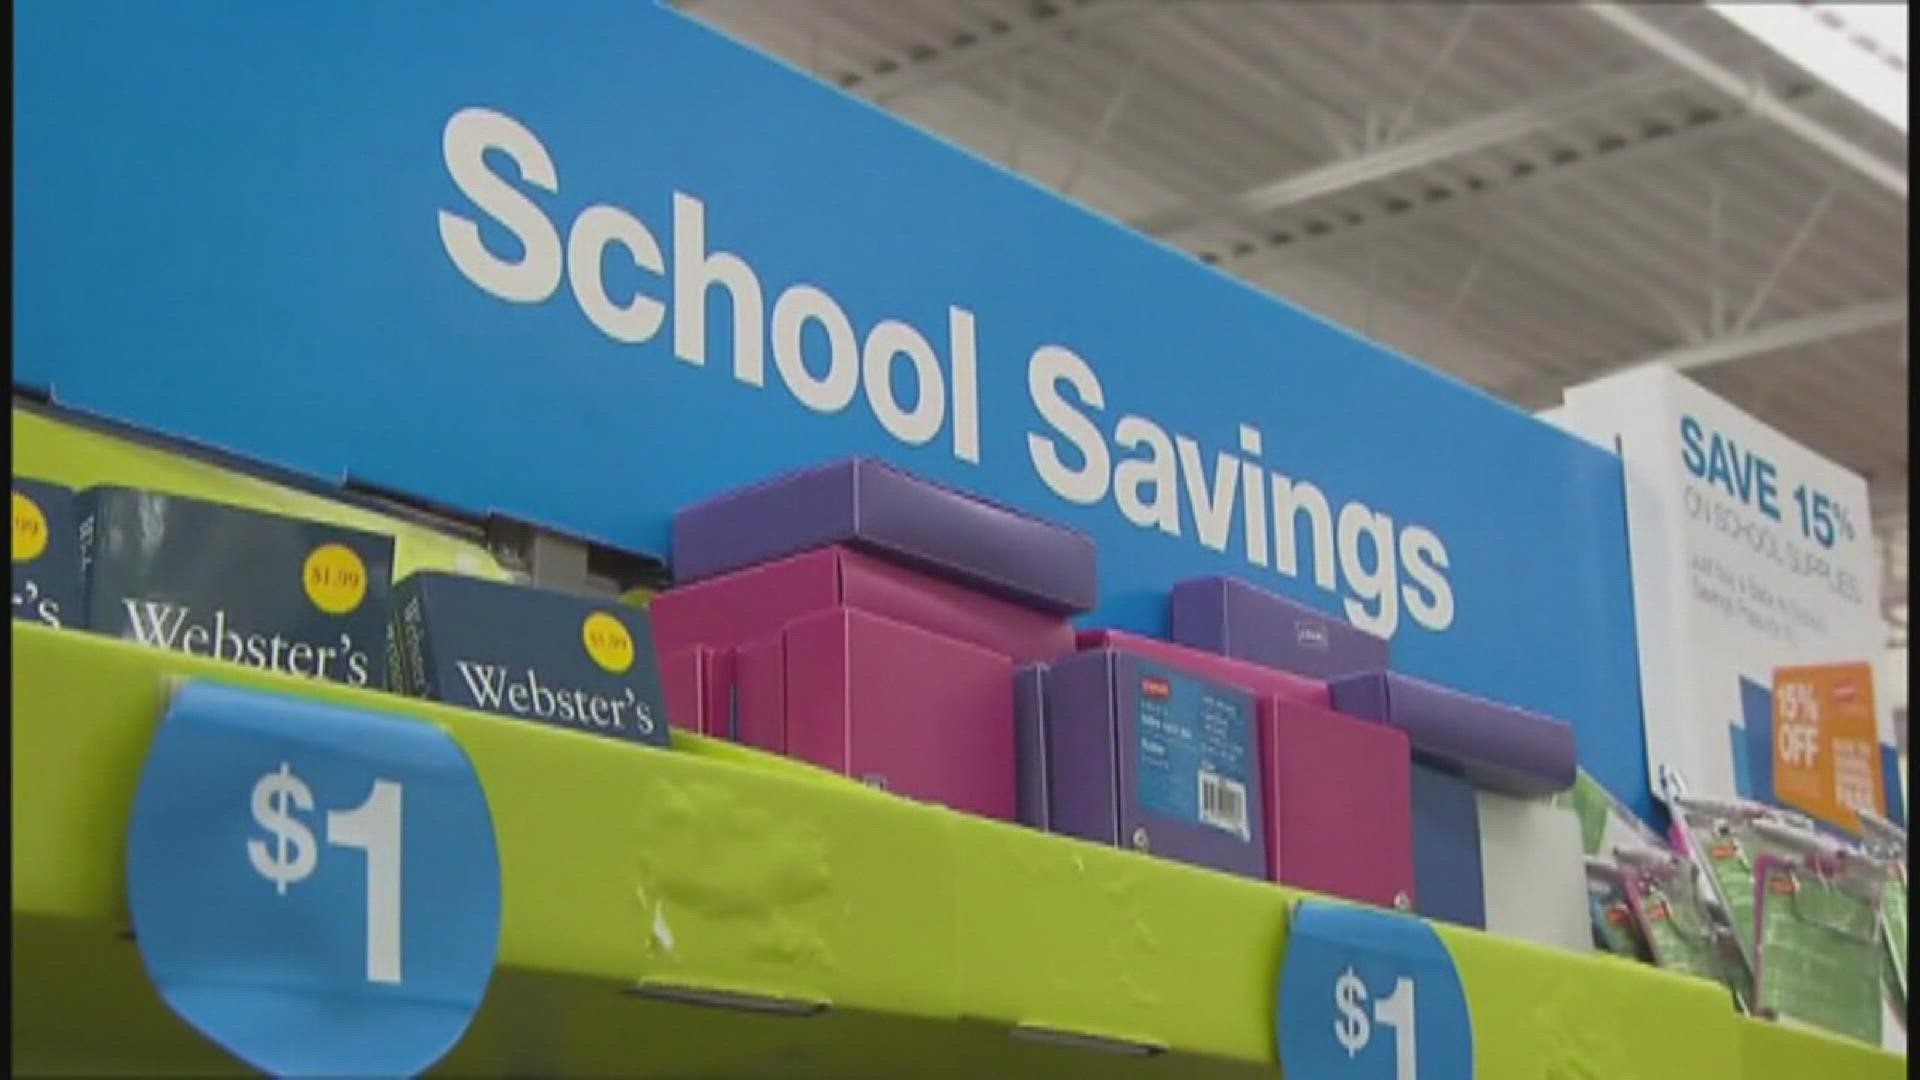 According to the National Retail Federation, families are expected to spend $37 billion on school supplies this year. That's $10 billion more than in 2019.